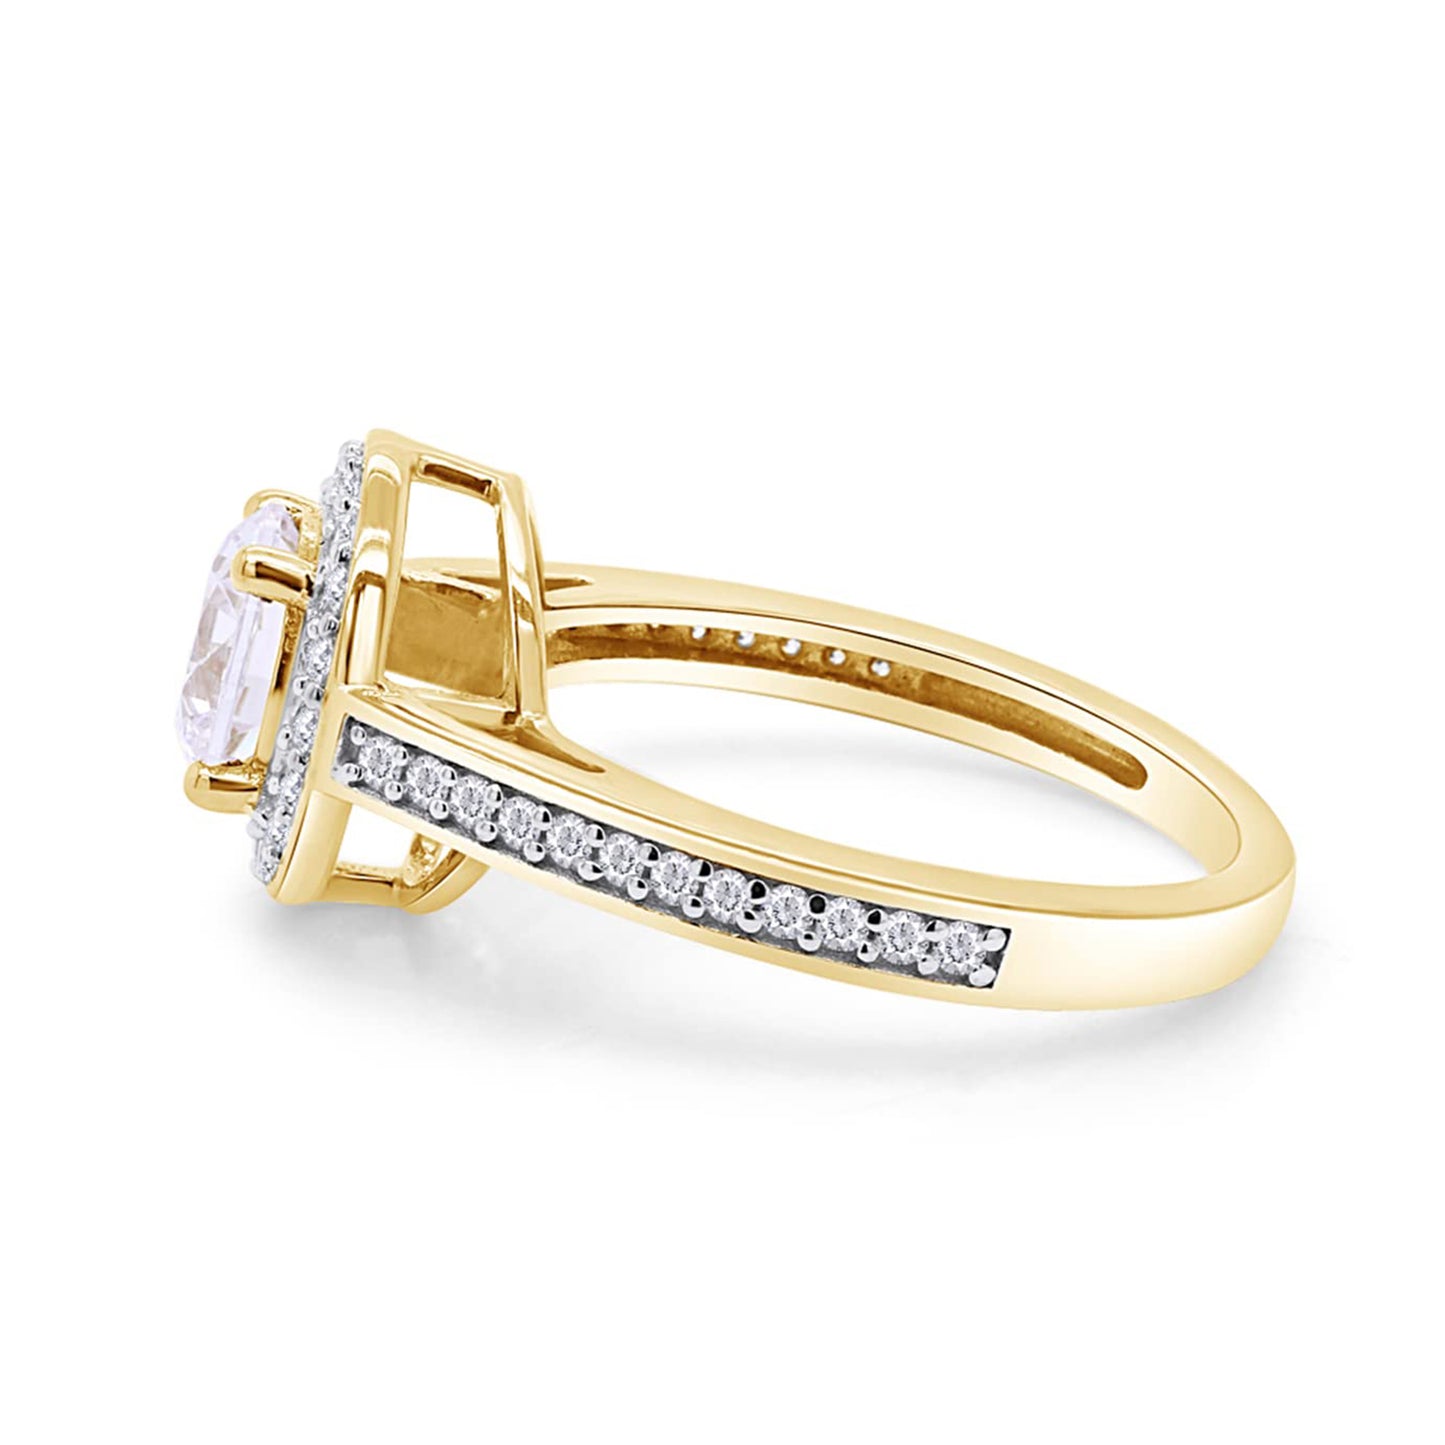 Round Shape Lab Created Moissanite Diamond Halo Engagement Ring in 10k Solid Gold (1.00 Cttw)